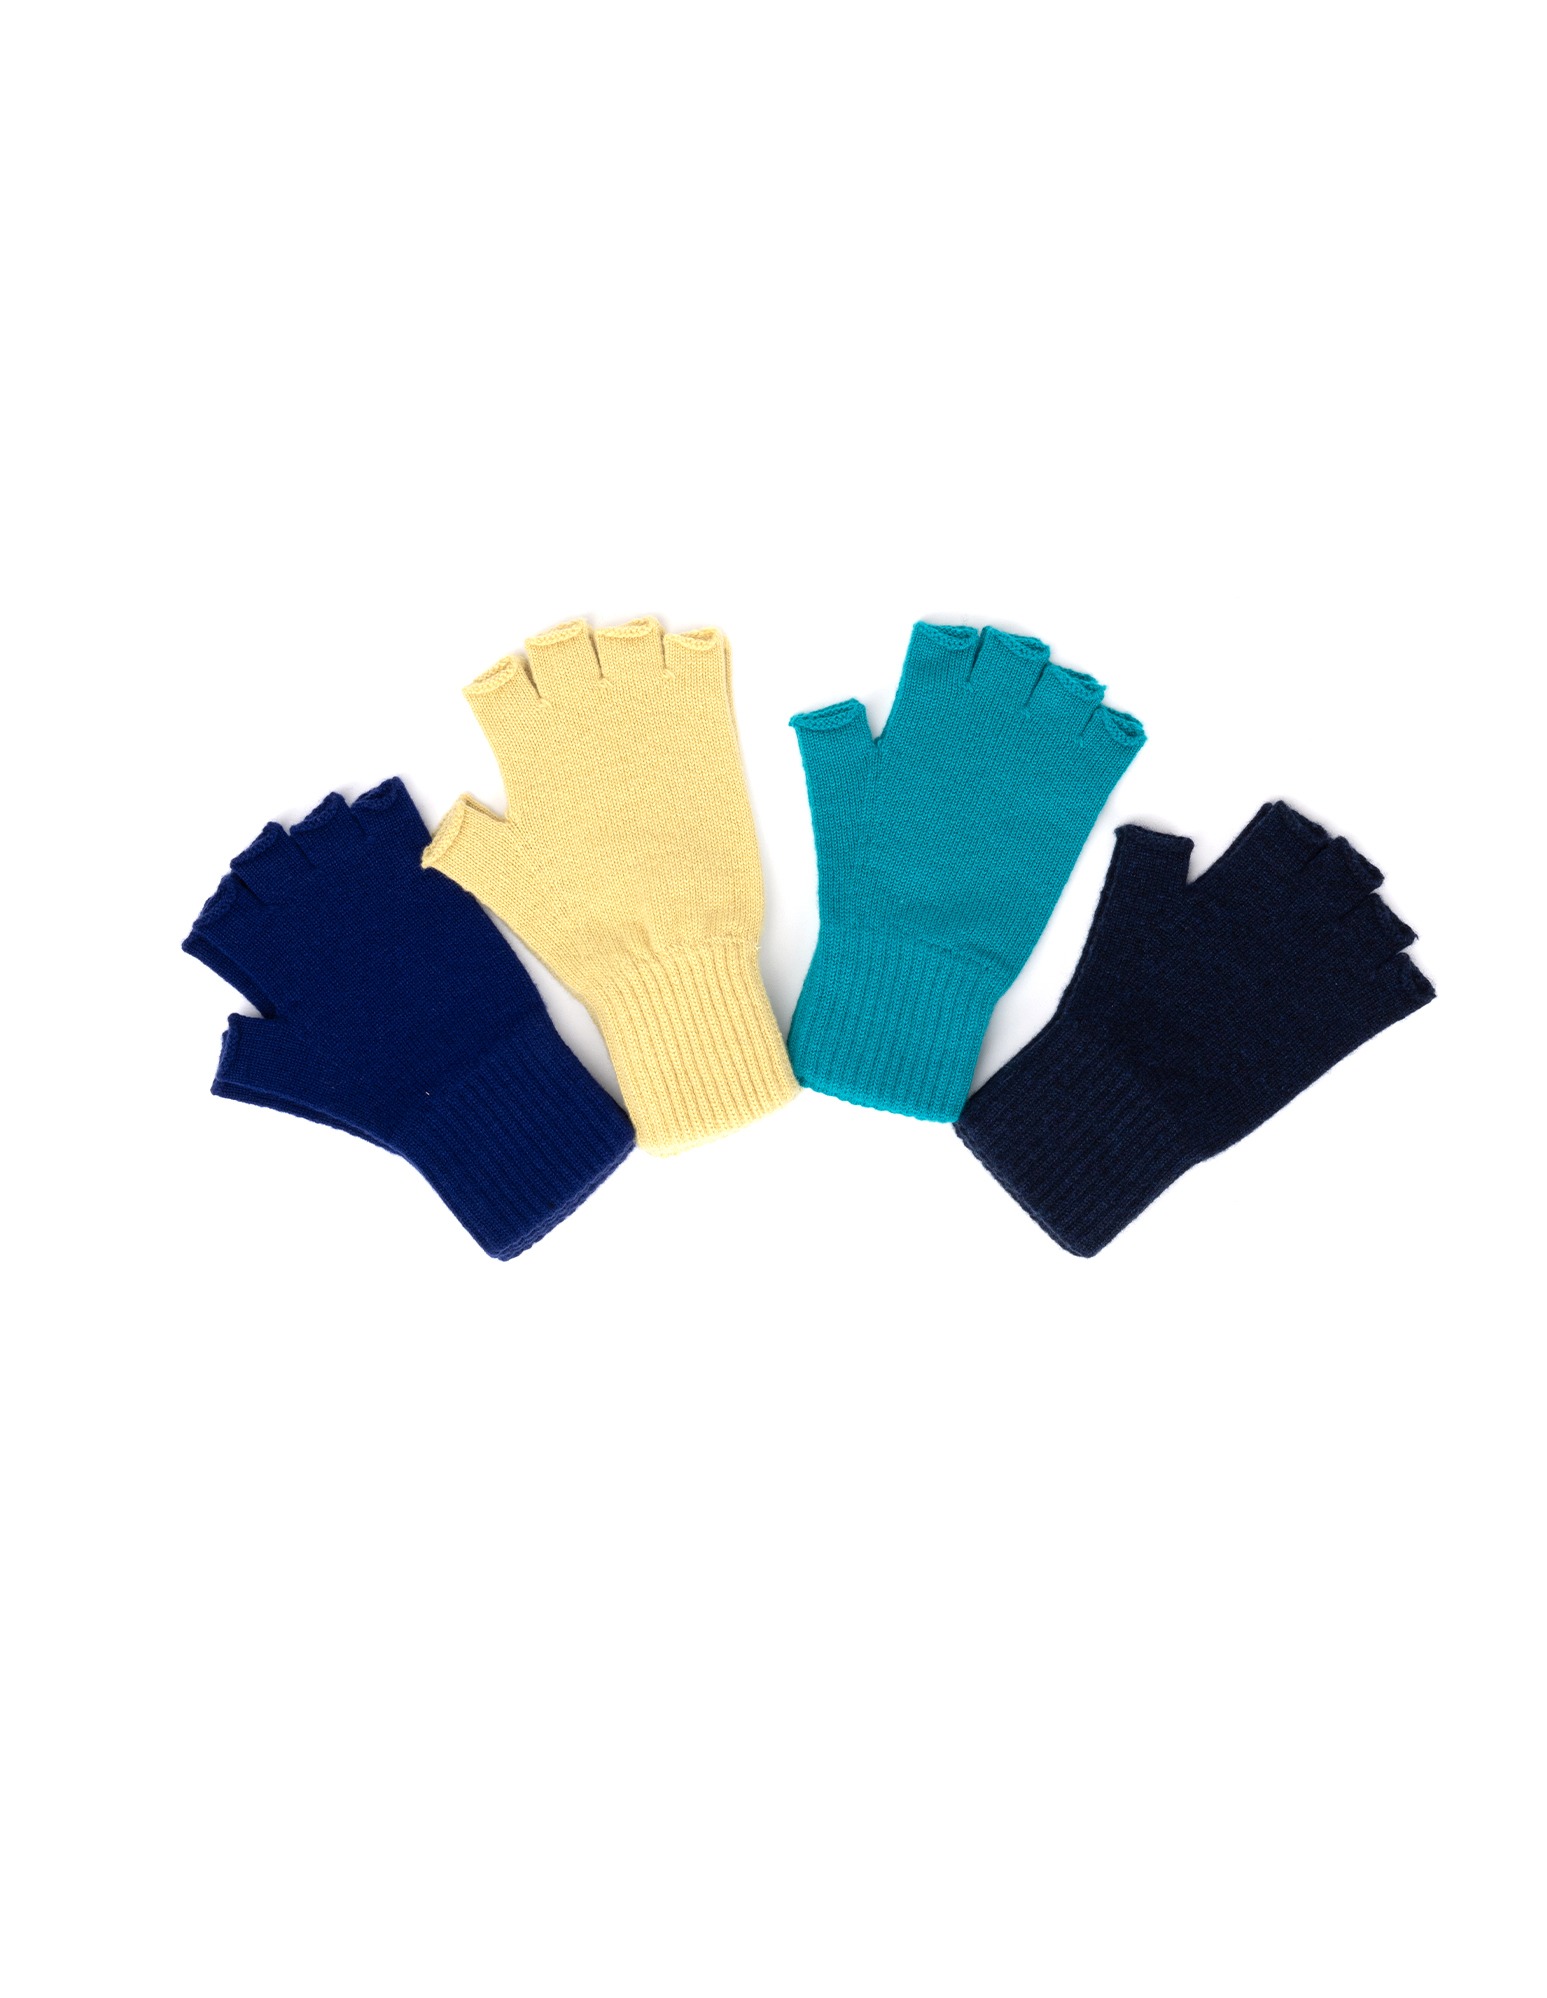 Field Gloves (4 Colors)